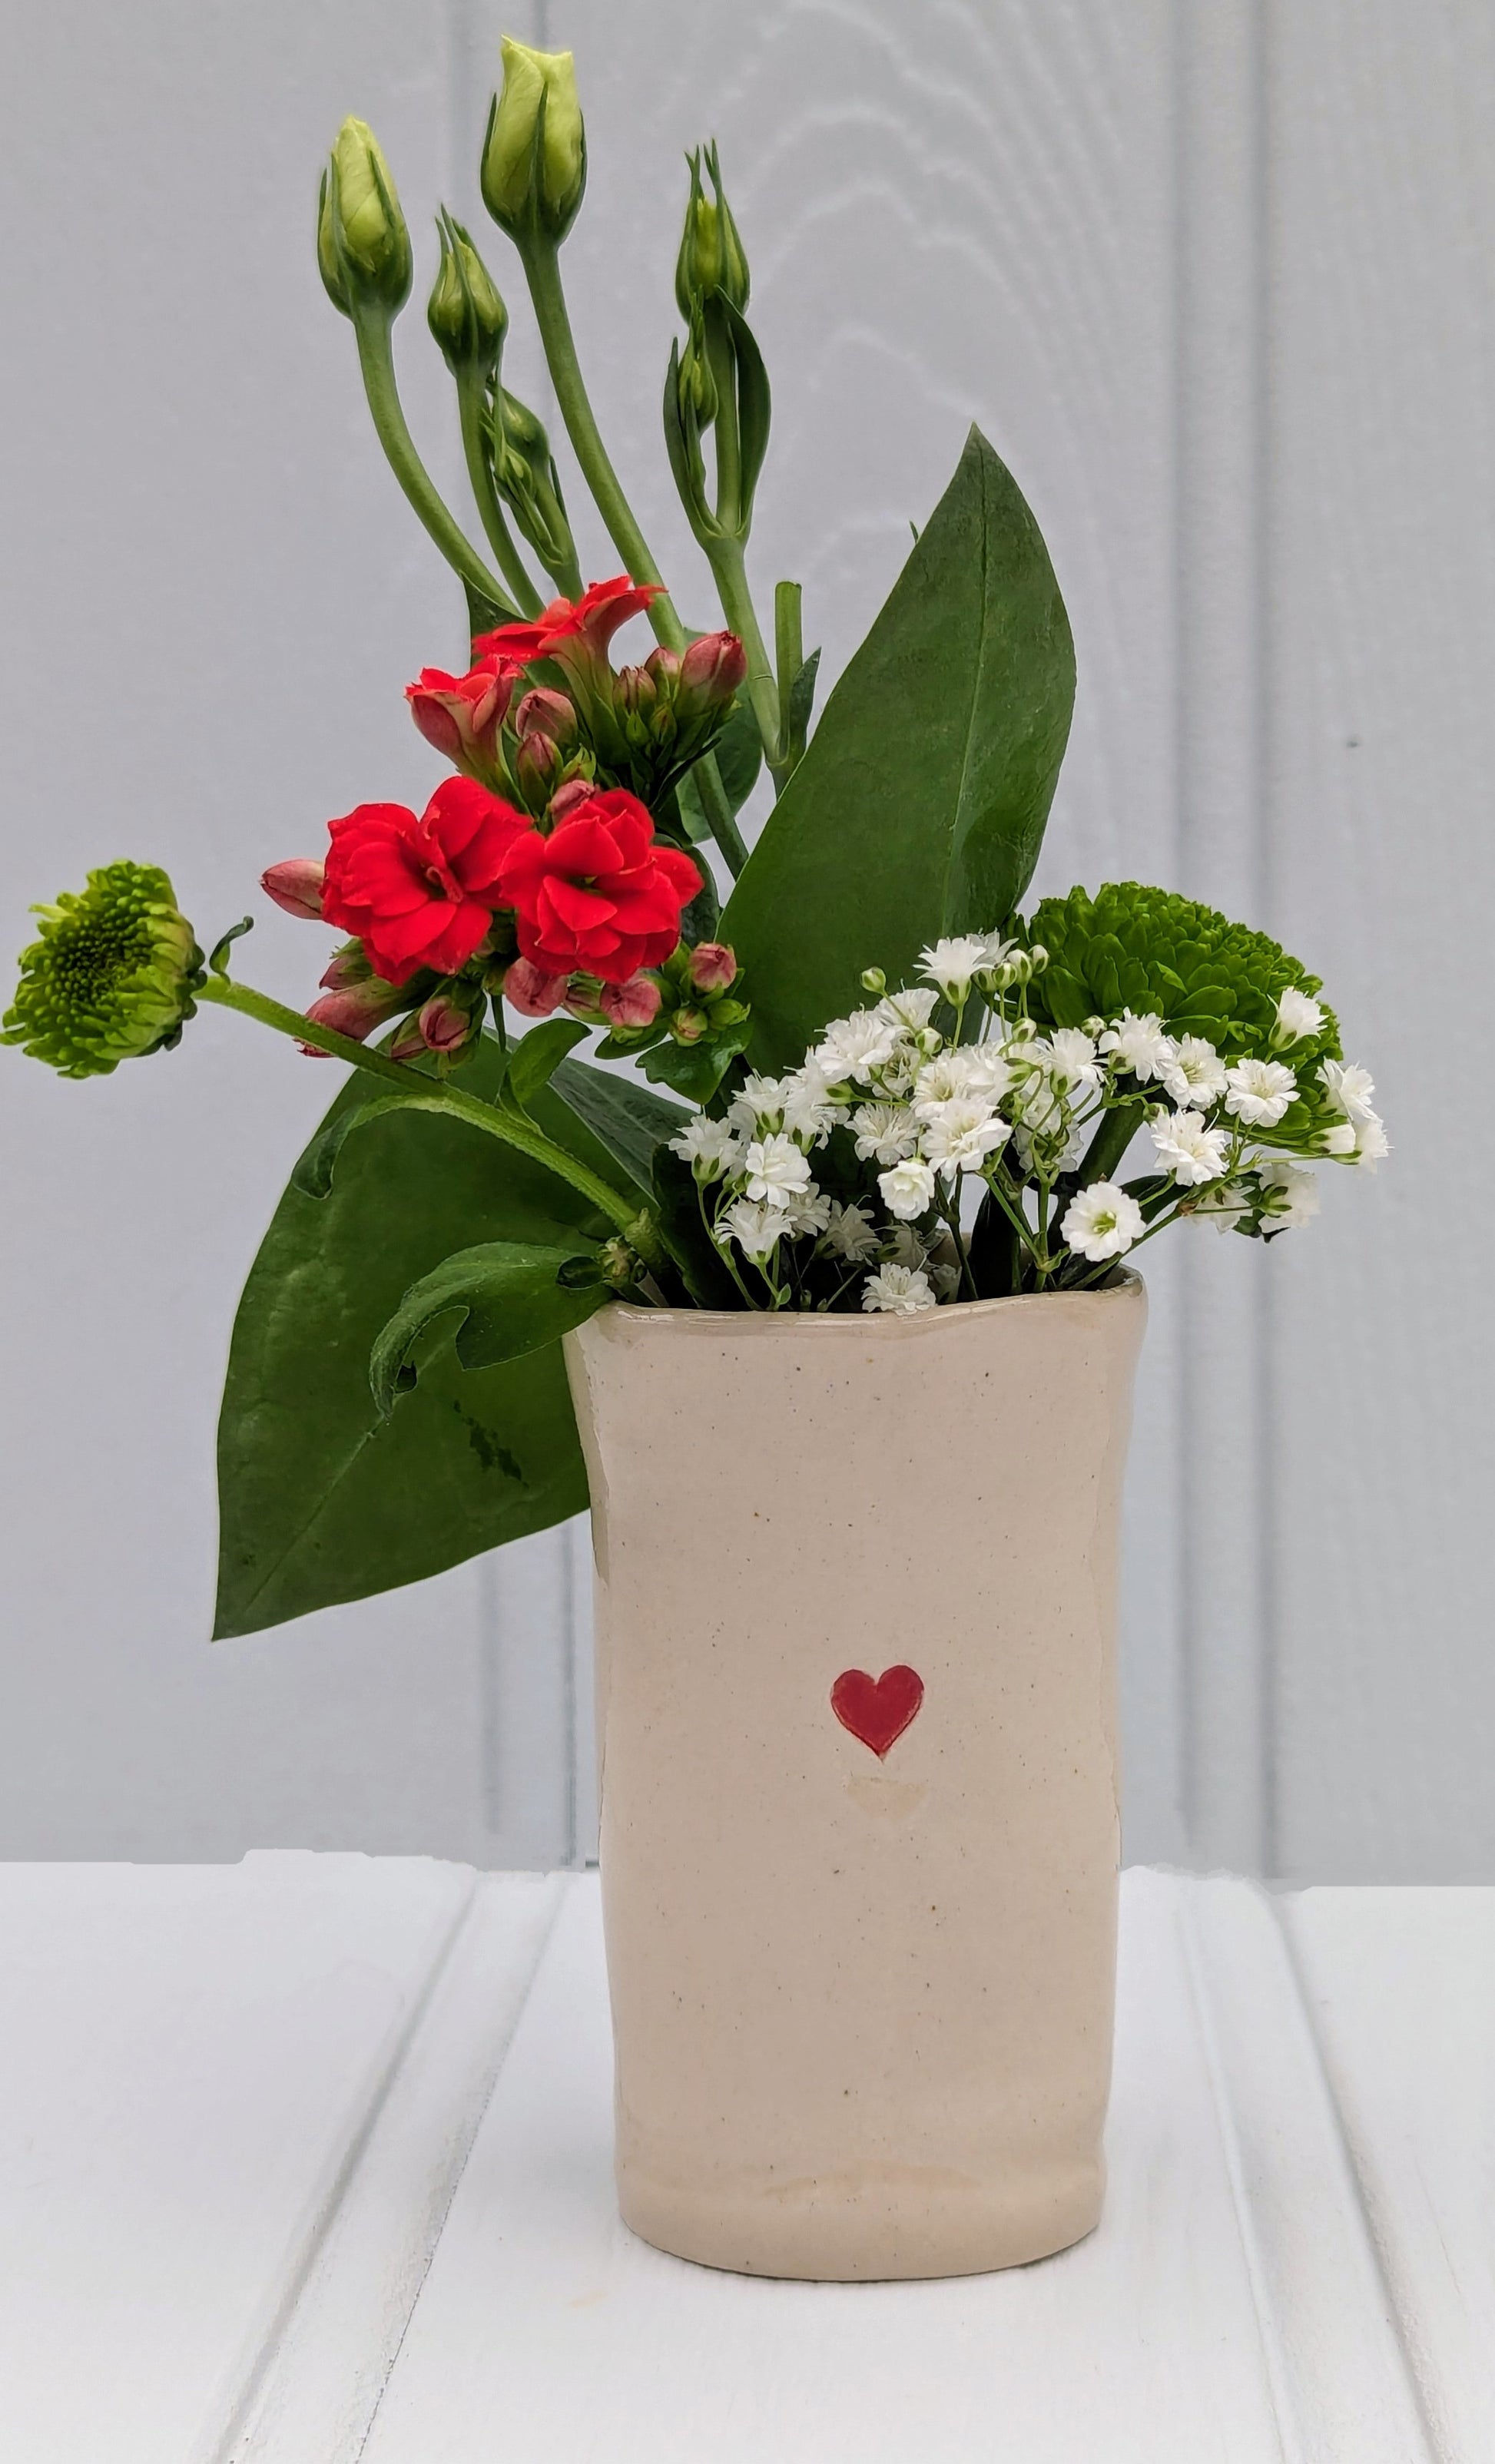 Sea Bramble Ceramics - Handmade Stoneware, little Sweet pea vases, natural colour with a delicate red heart